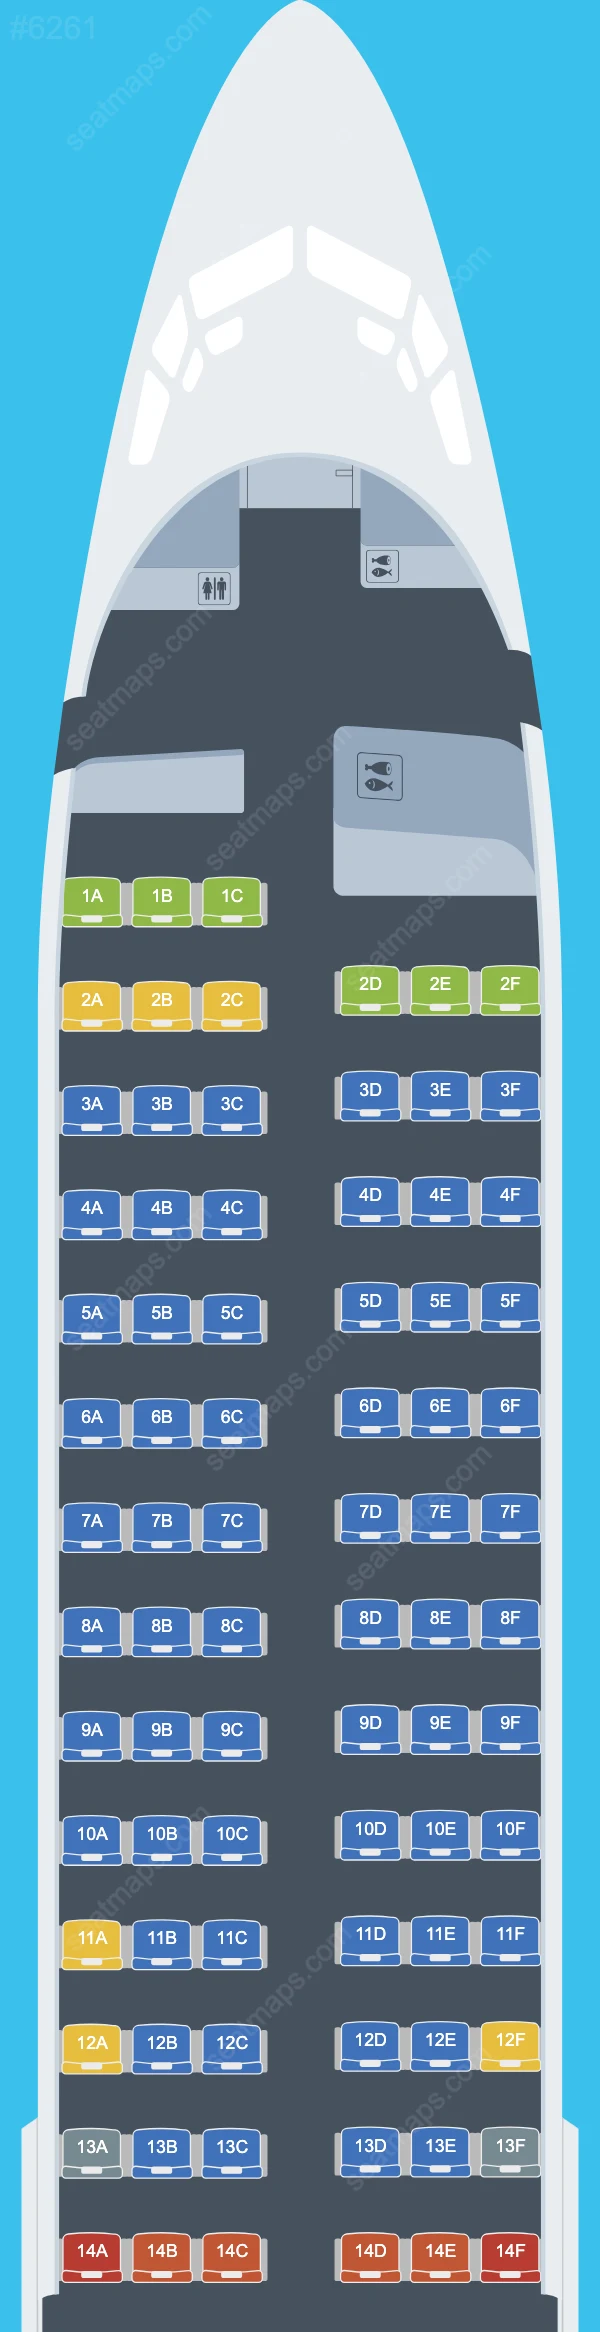 Turkish Airlines Boeing 737 Seat Maps 737-800 V.2